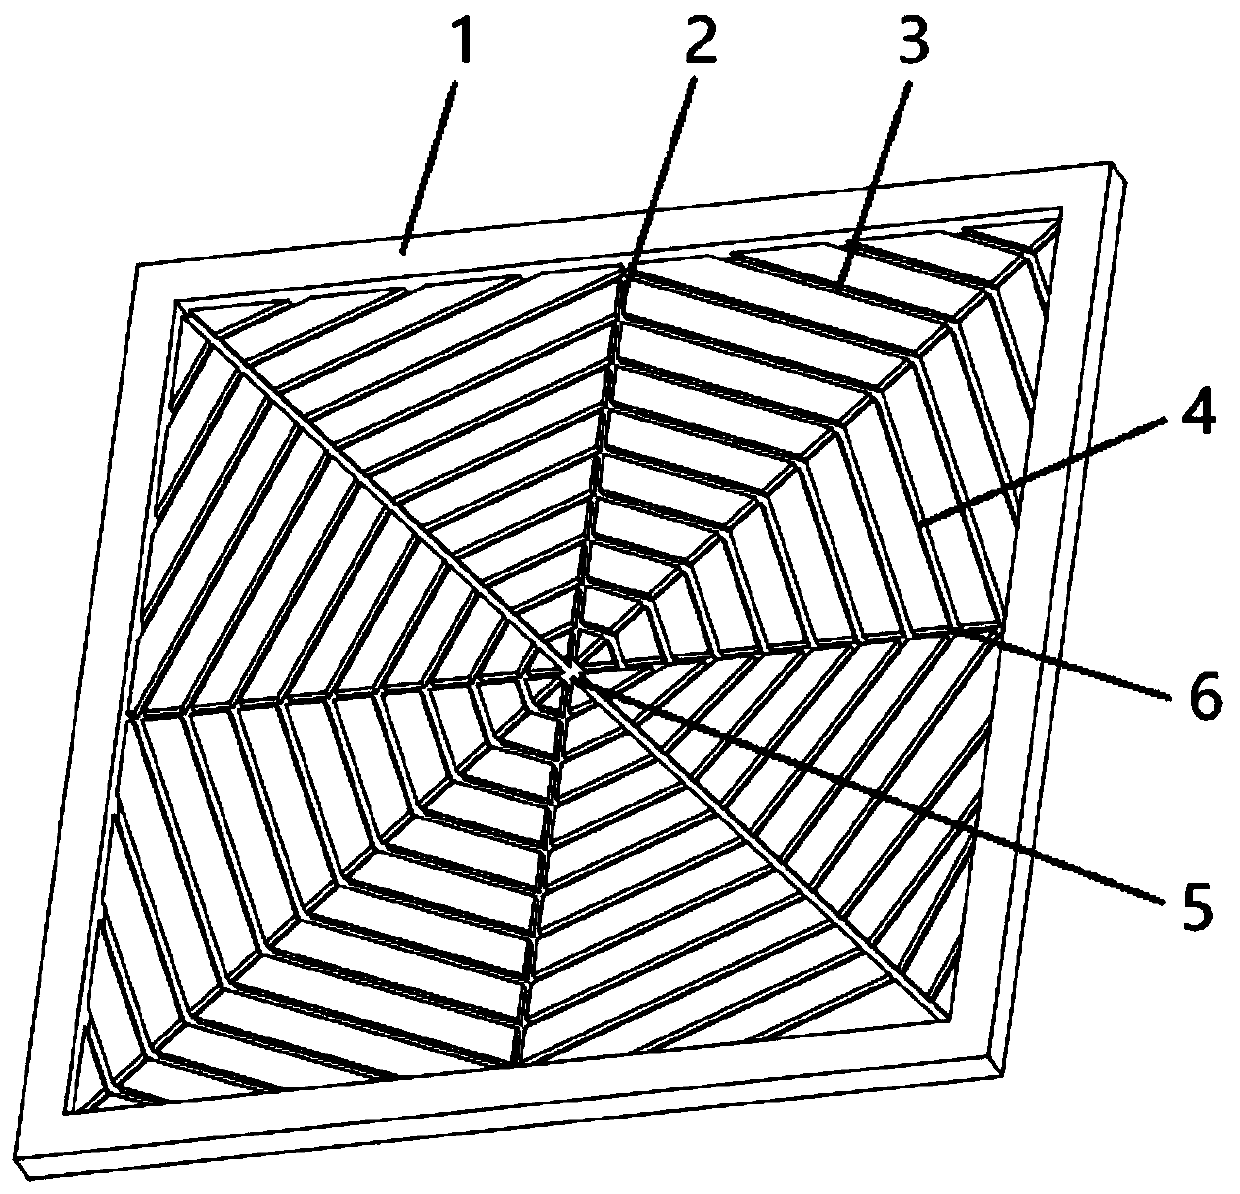 Bionic liquid absorption core with cobweb structure and soaking plate using same